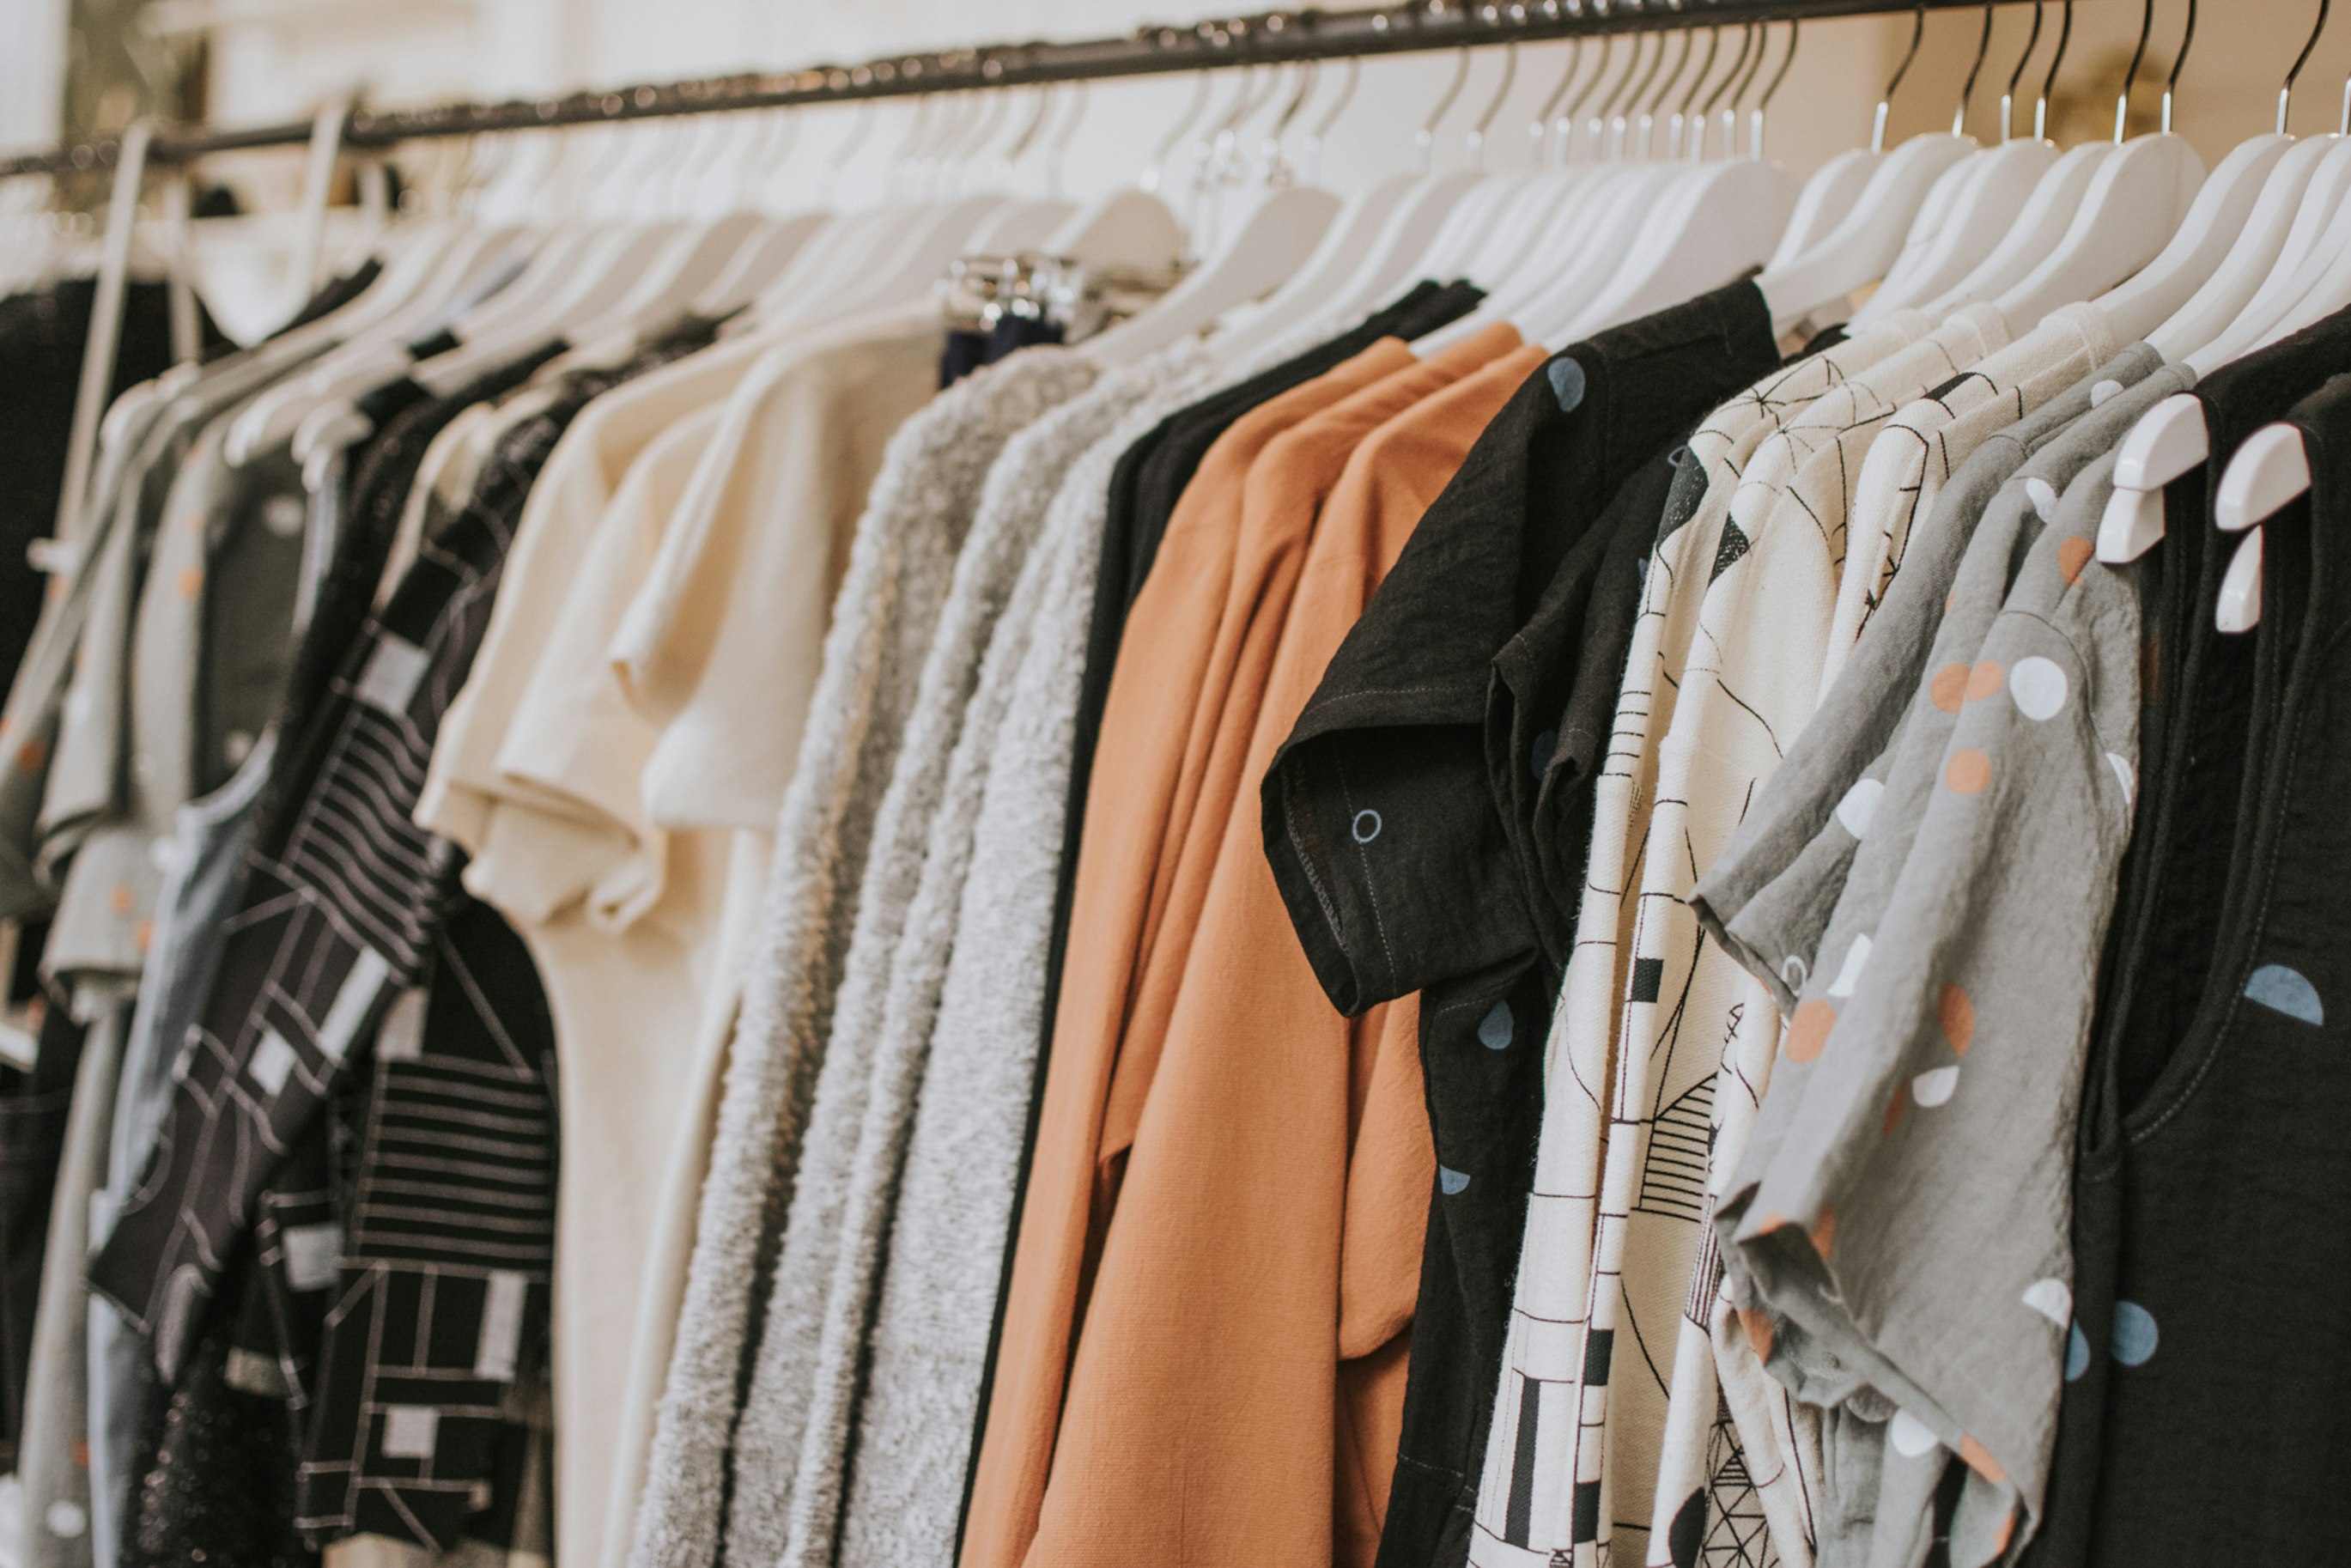 Ethical fashion is confusing — even shoppers with good intentions get  overwhelmed